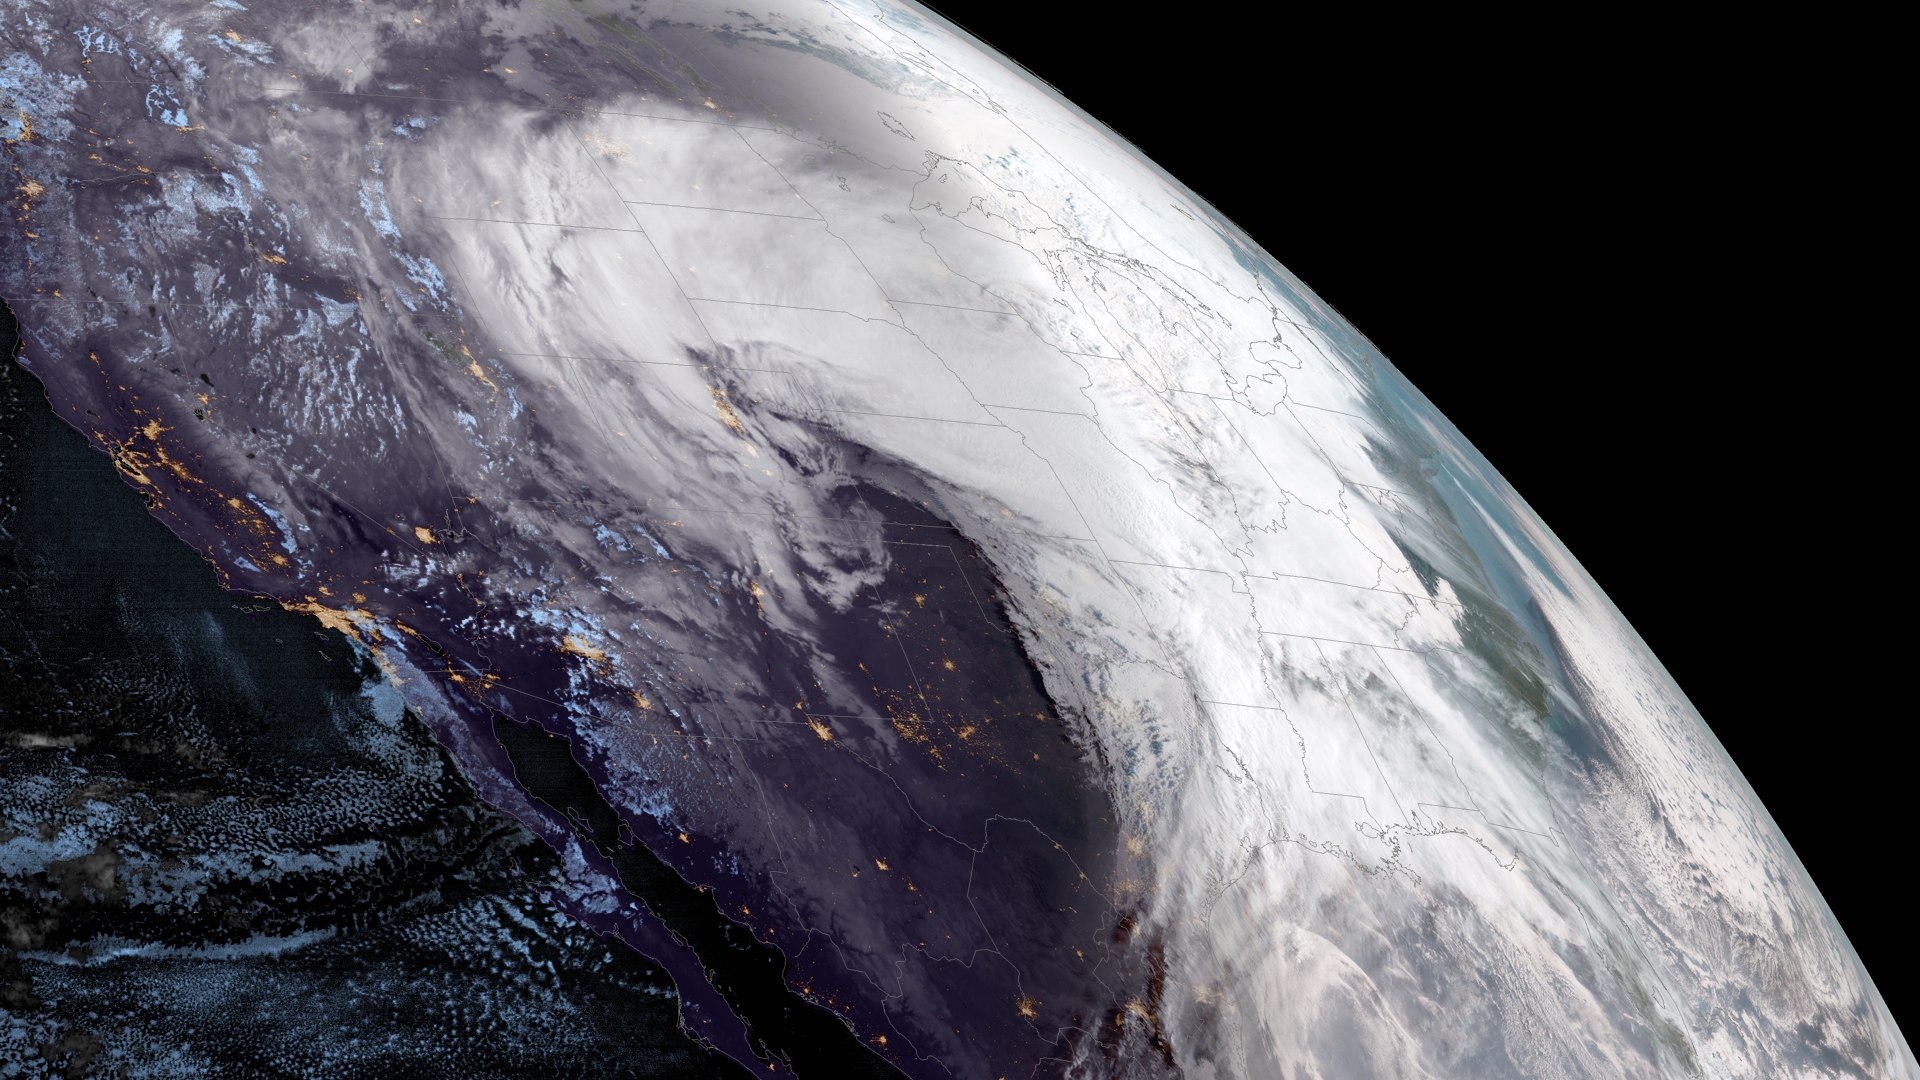 Powerful Storm System Seen by GOES West